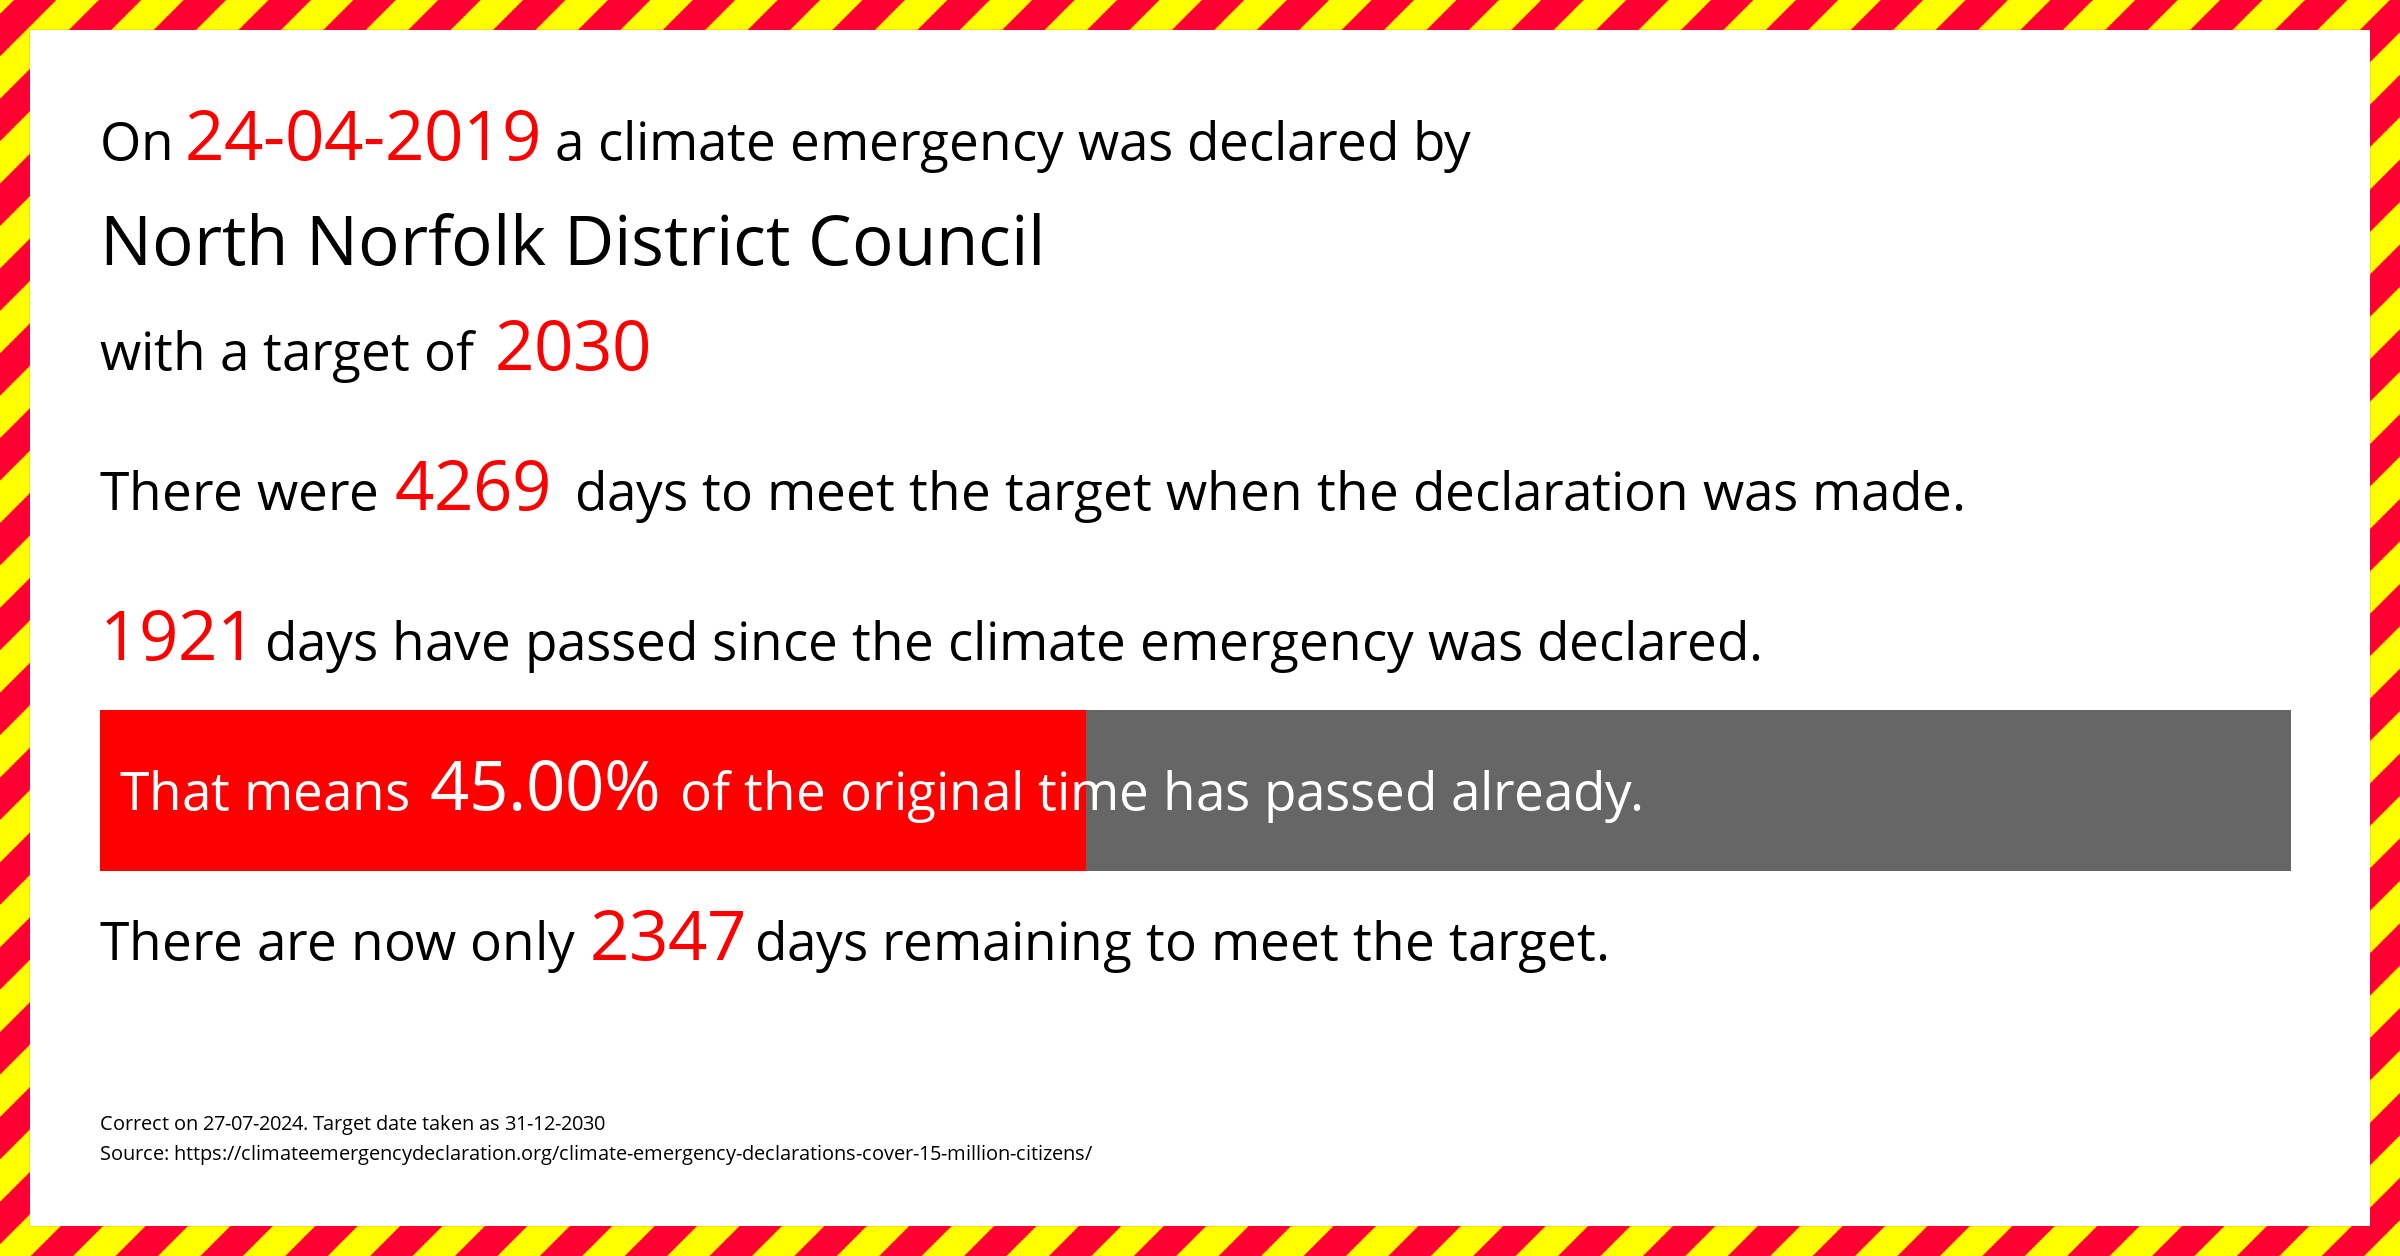 North Norfolk District Council declared a Climate emergency on Wednesday 24th April 2019, with a target of 2030.